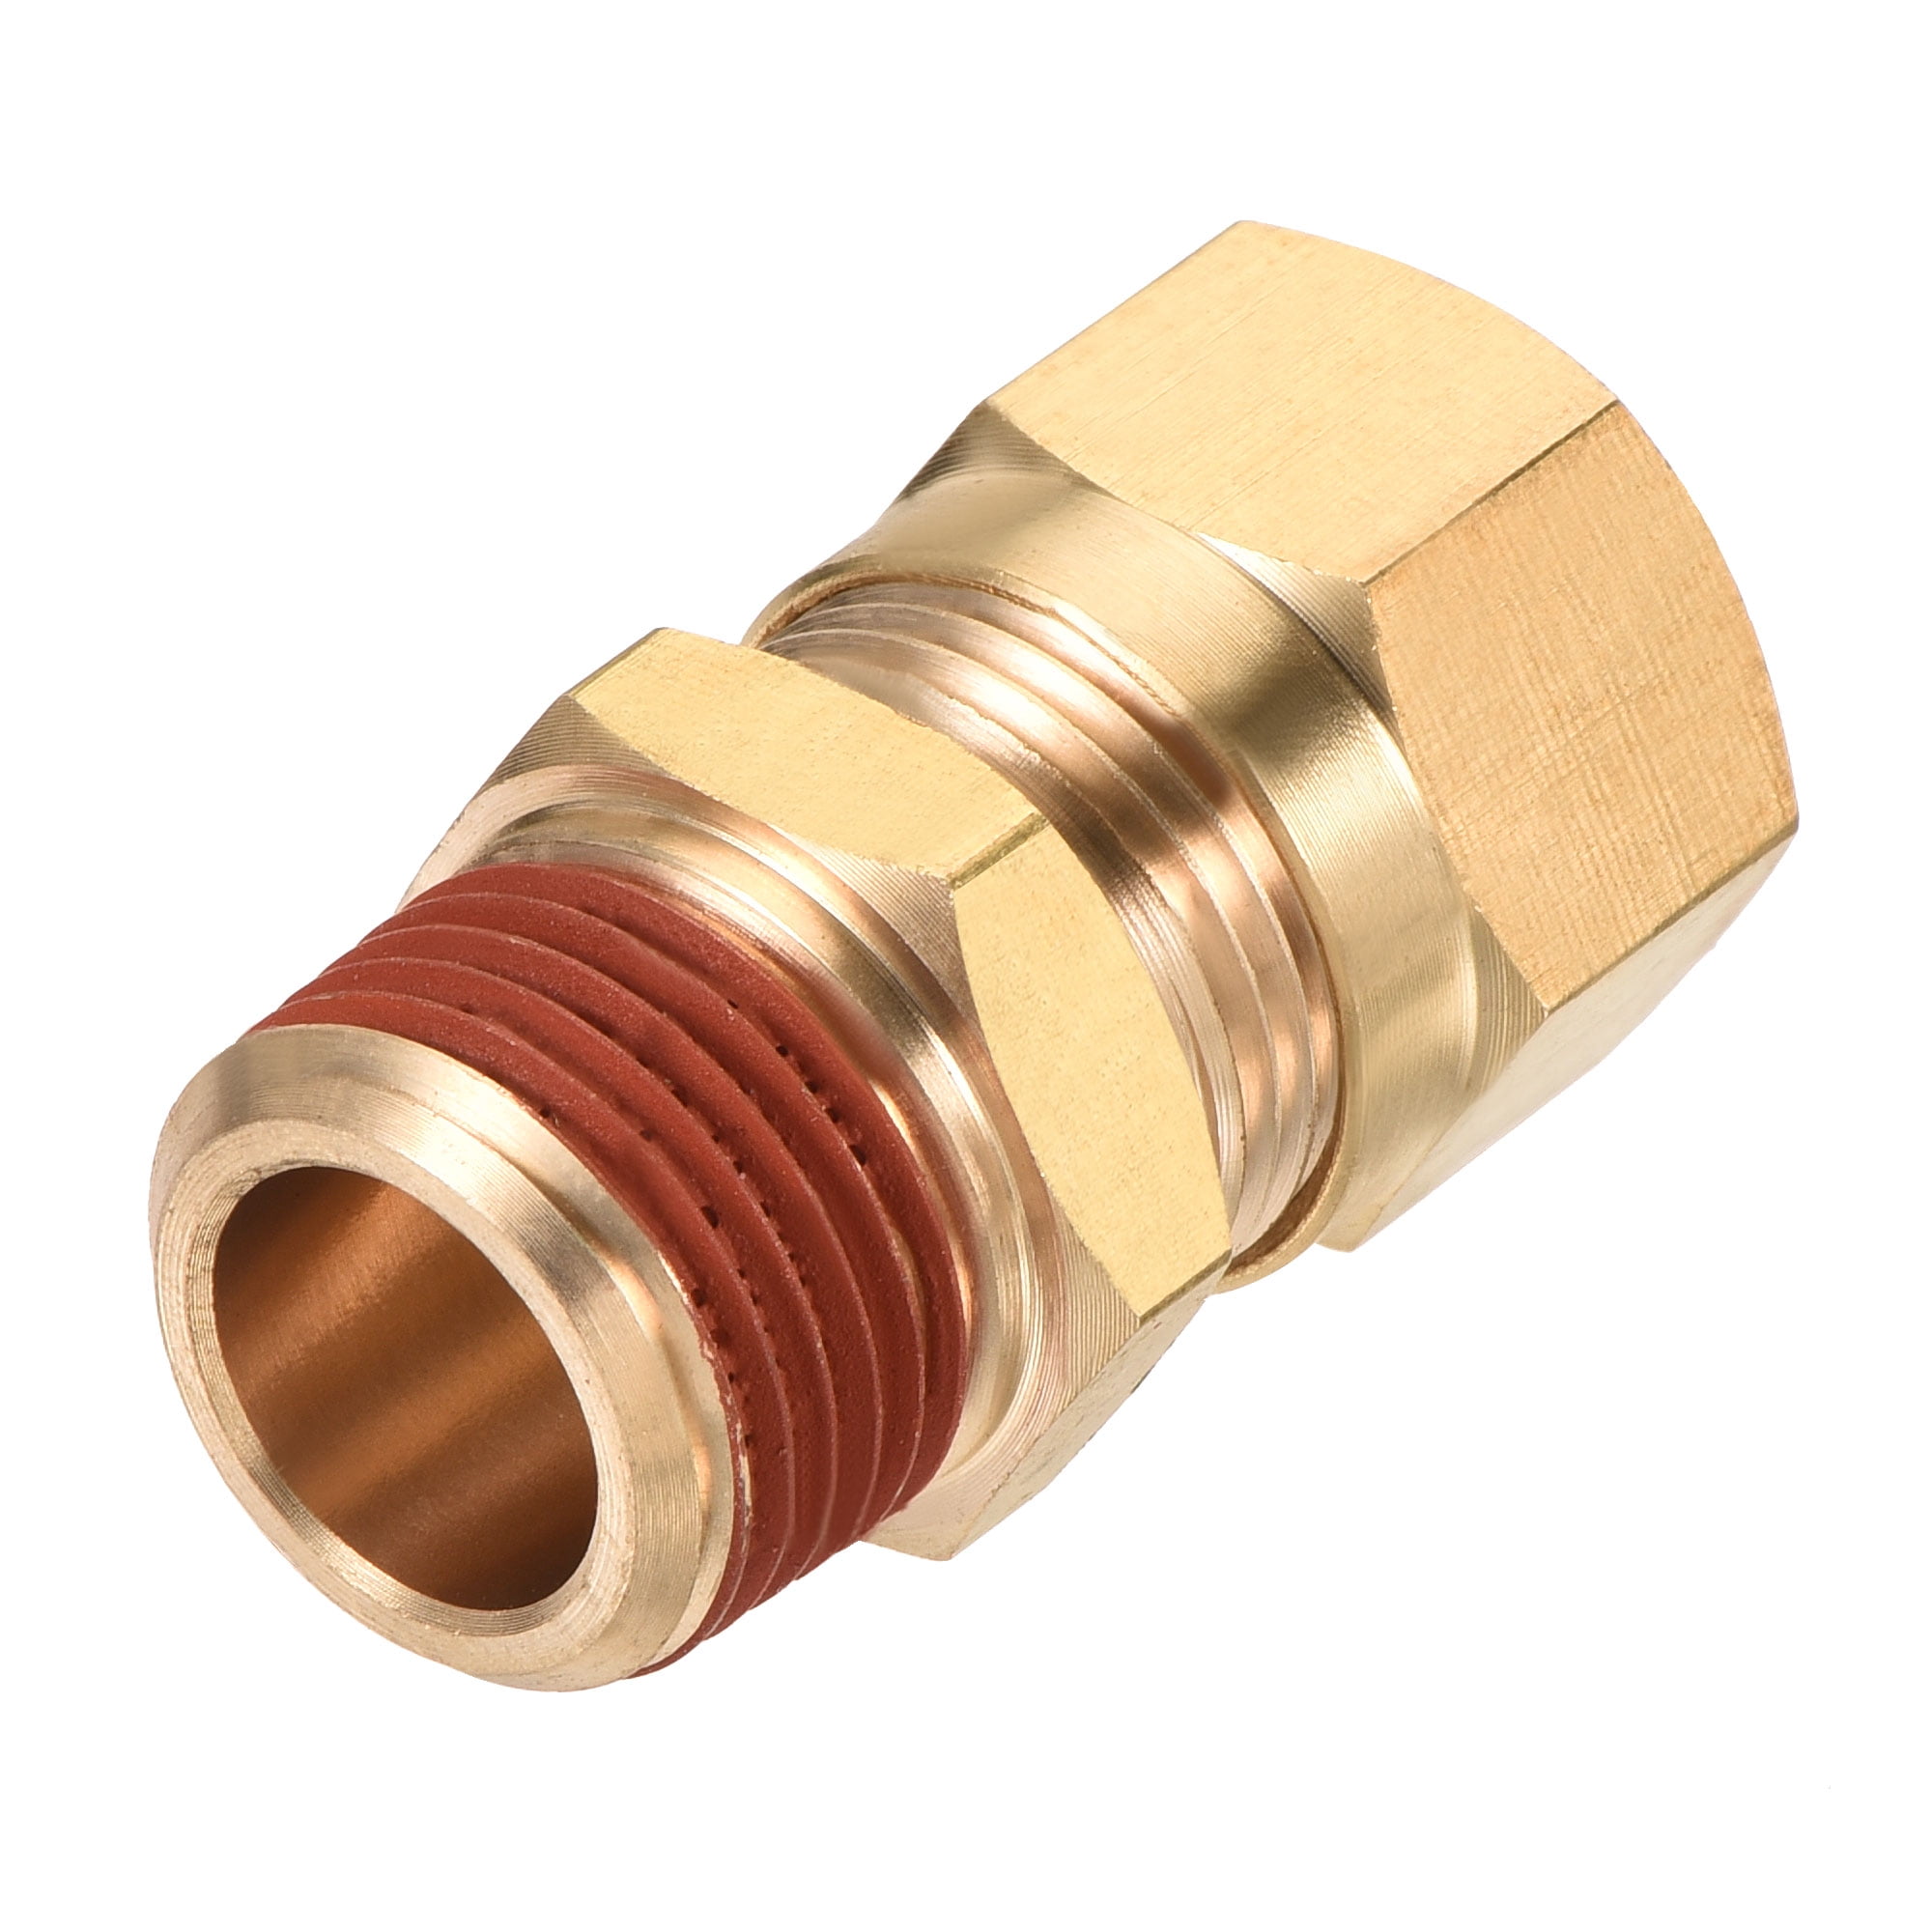 Uxcell Brass Compression Tube Fitting 1/4NPT x 3/8 Tube OD Straight  Coupling Adapter 